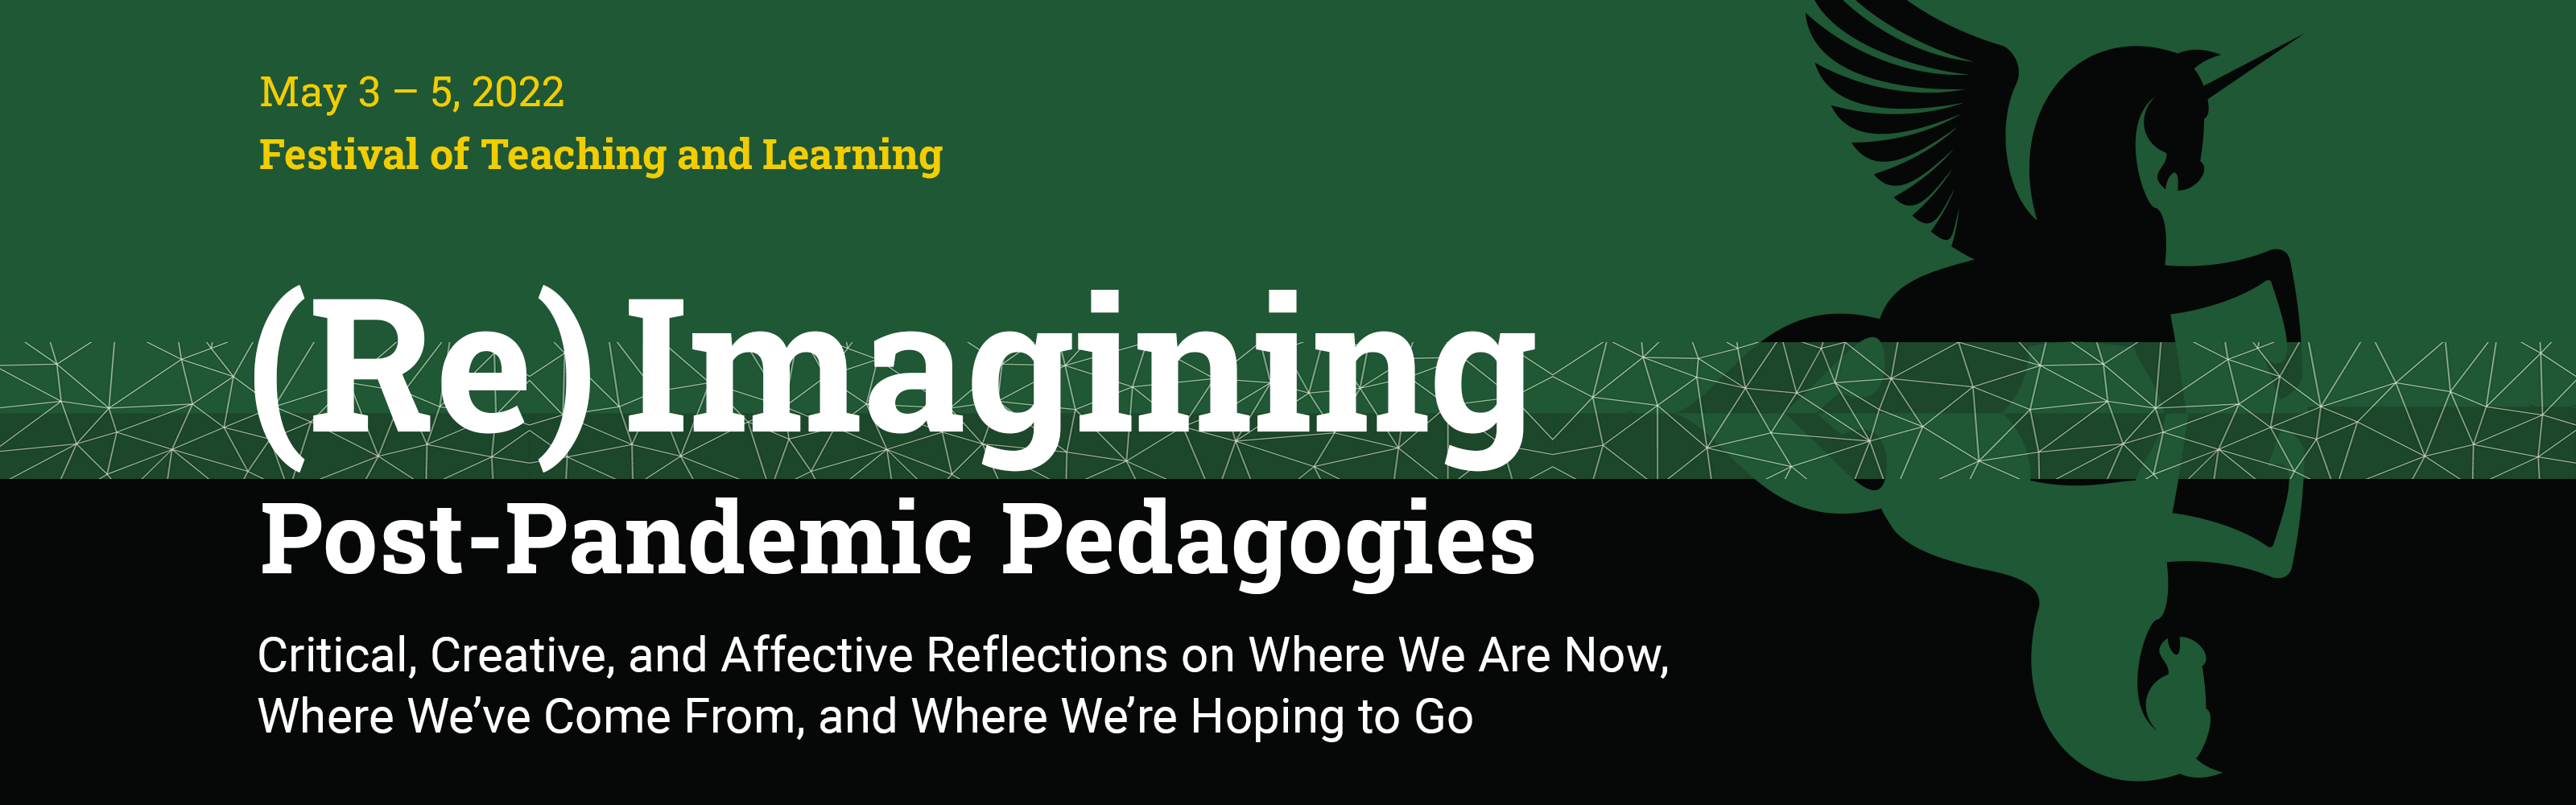 The words “(Re)Imagining Post-Pandemic Pedagogies” on a black and emerald green background with a black winged-unicorn shape in the top right corner and an upside-down green horse outline reflected under it in the bottom right corner.